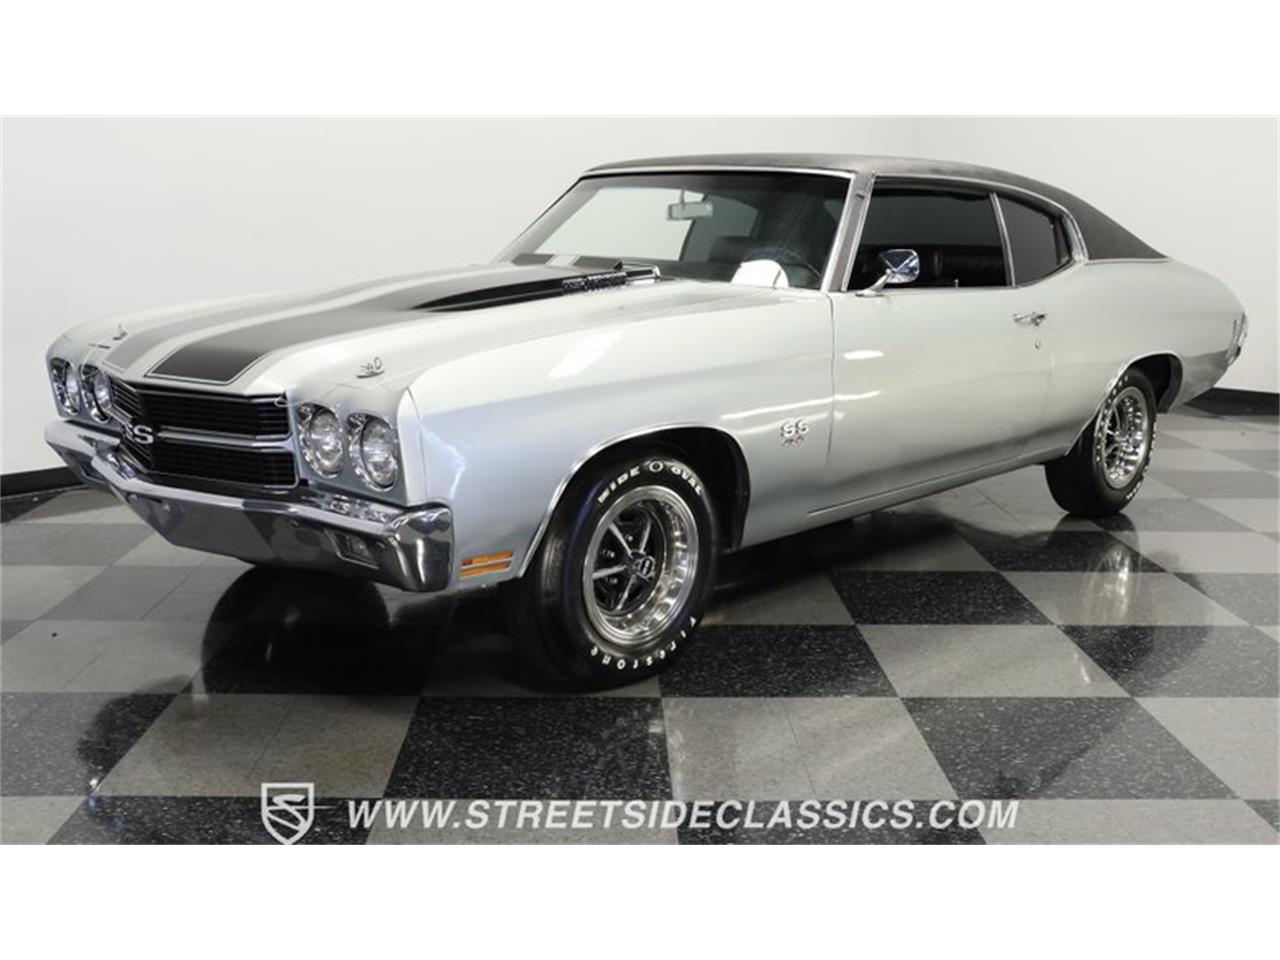 For Sale: 1970 Chevrolet Chevelle in Lutz, Florida for sale in Lutz, FL